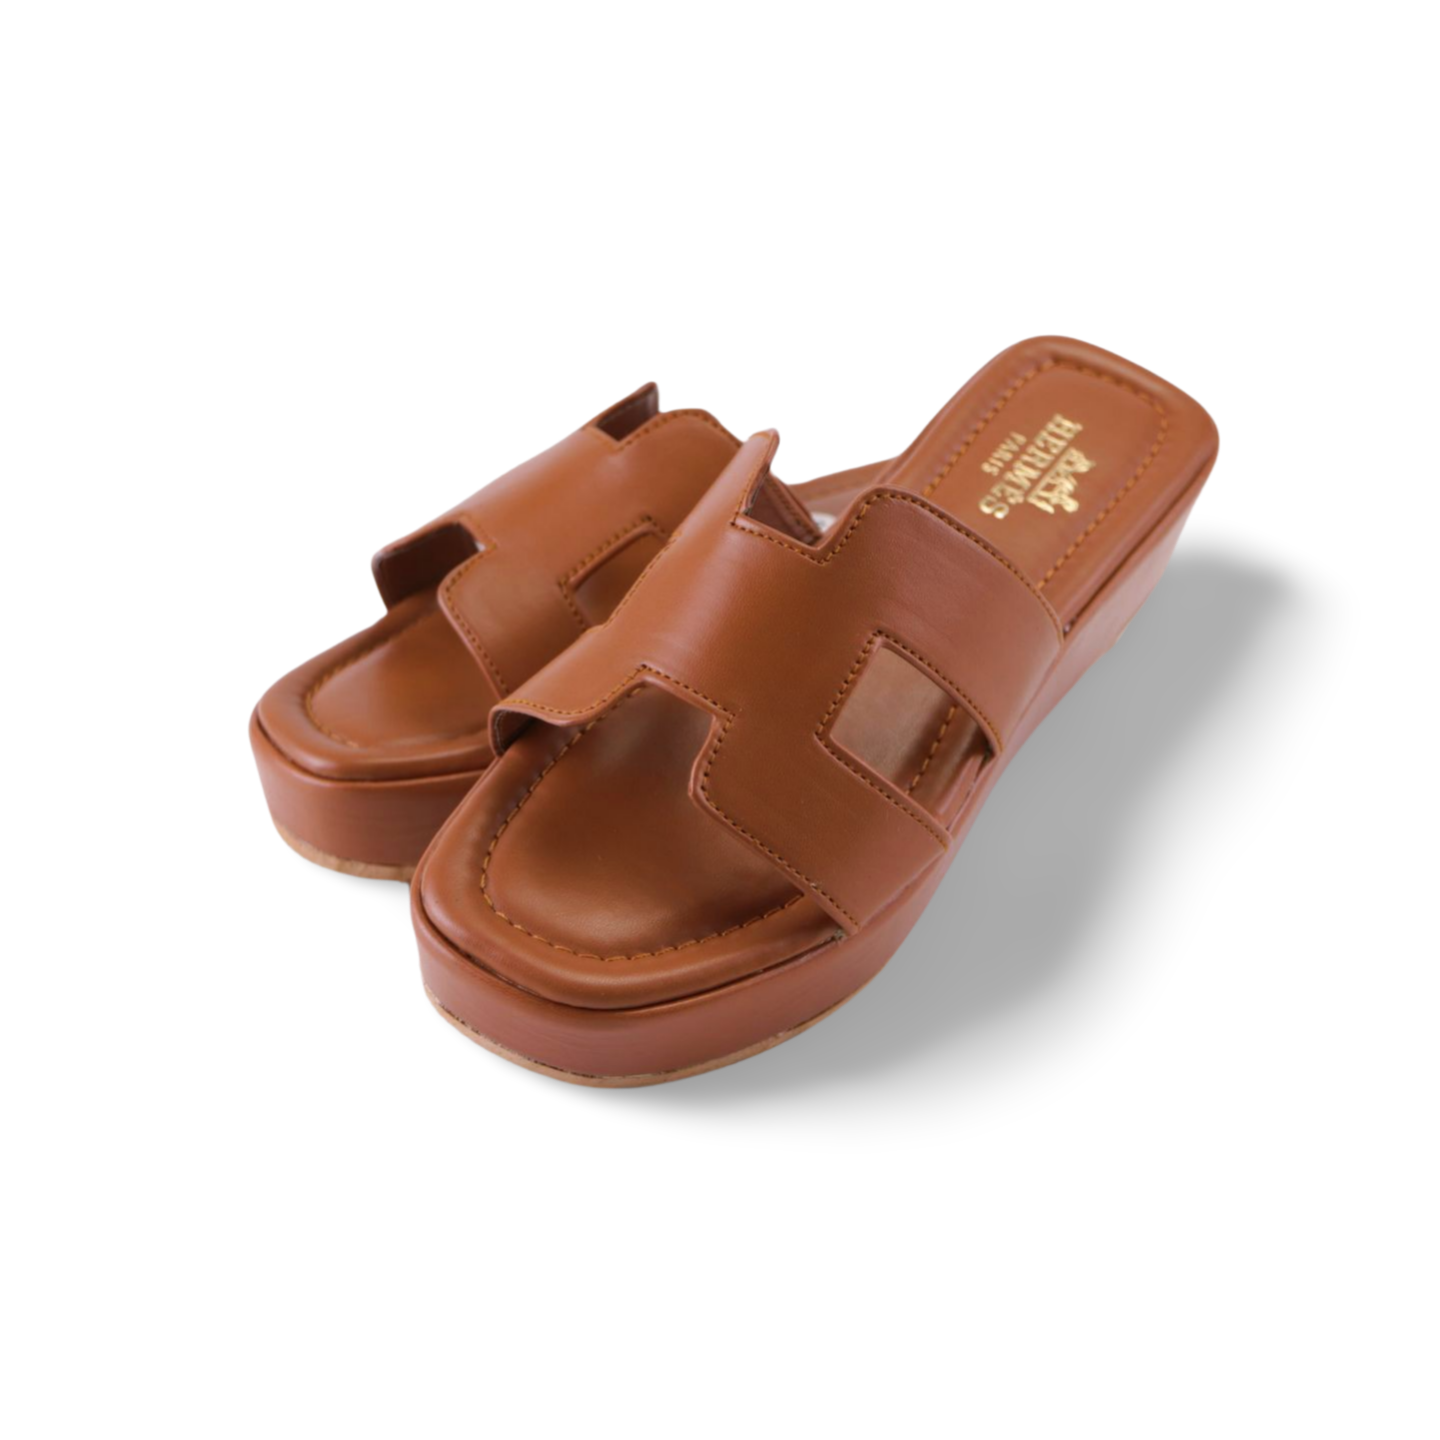 Stylish Wedge Sandals for Women - Comfort and Versatility